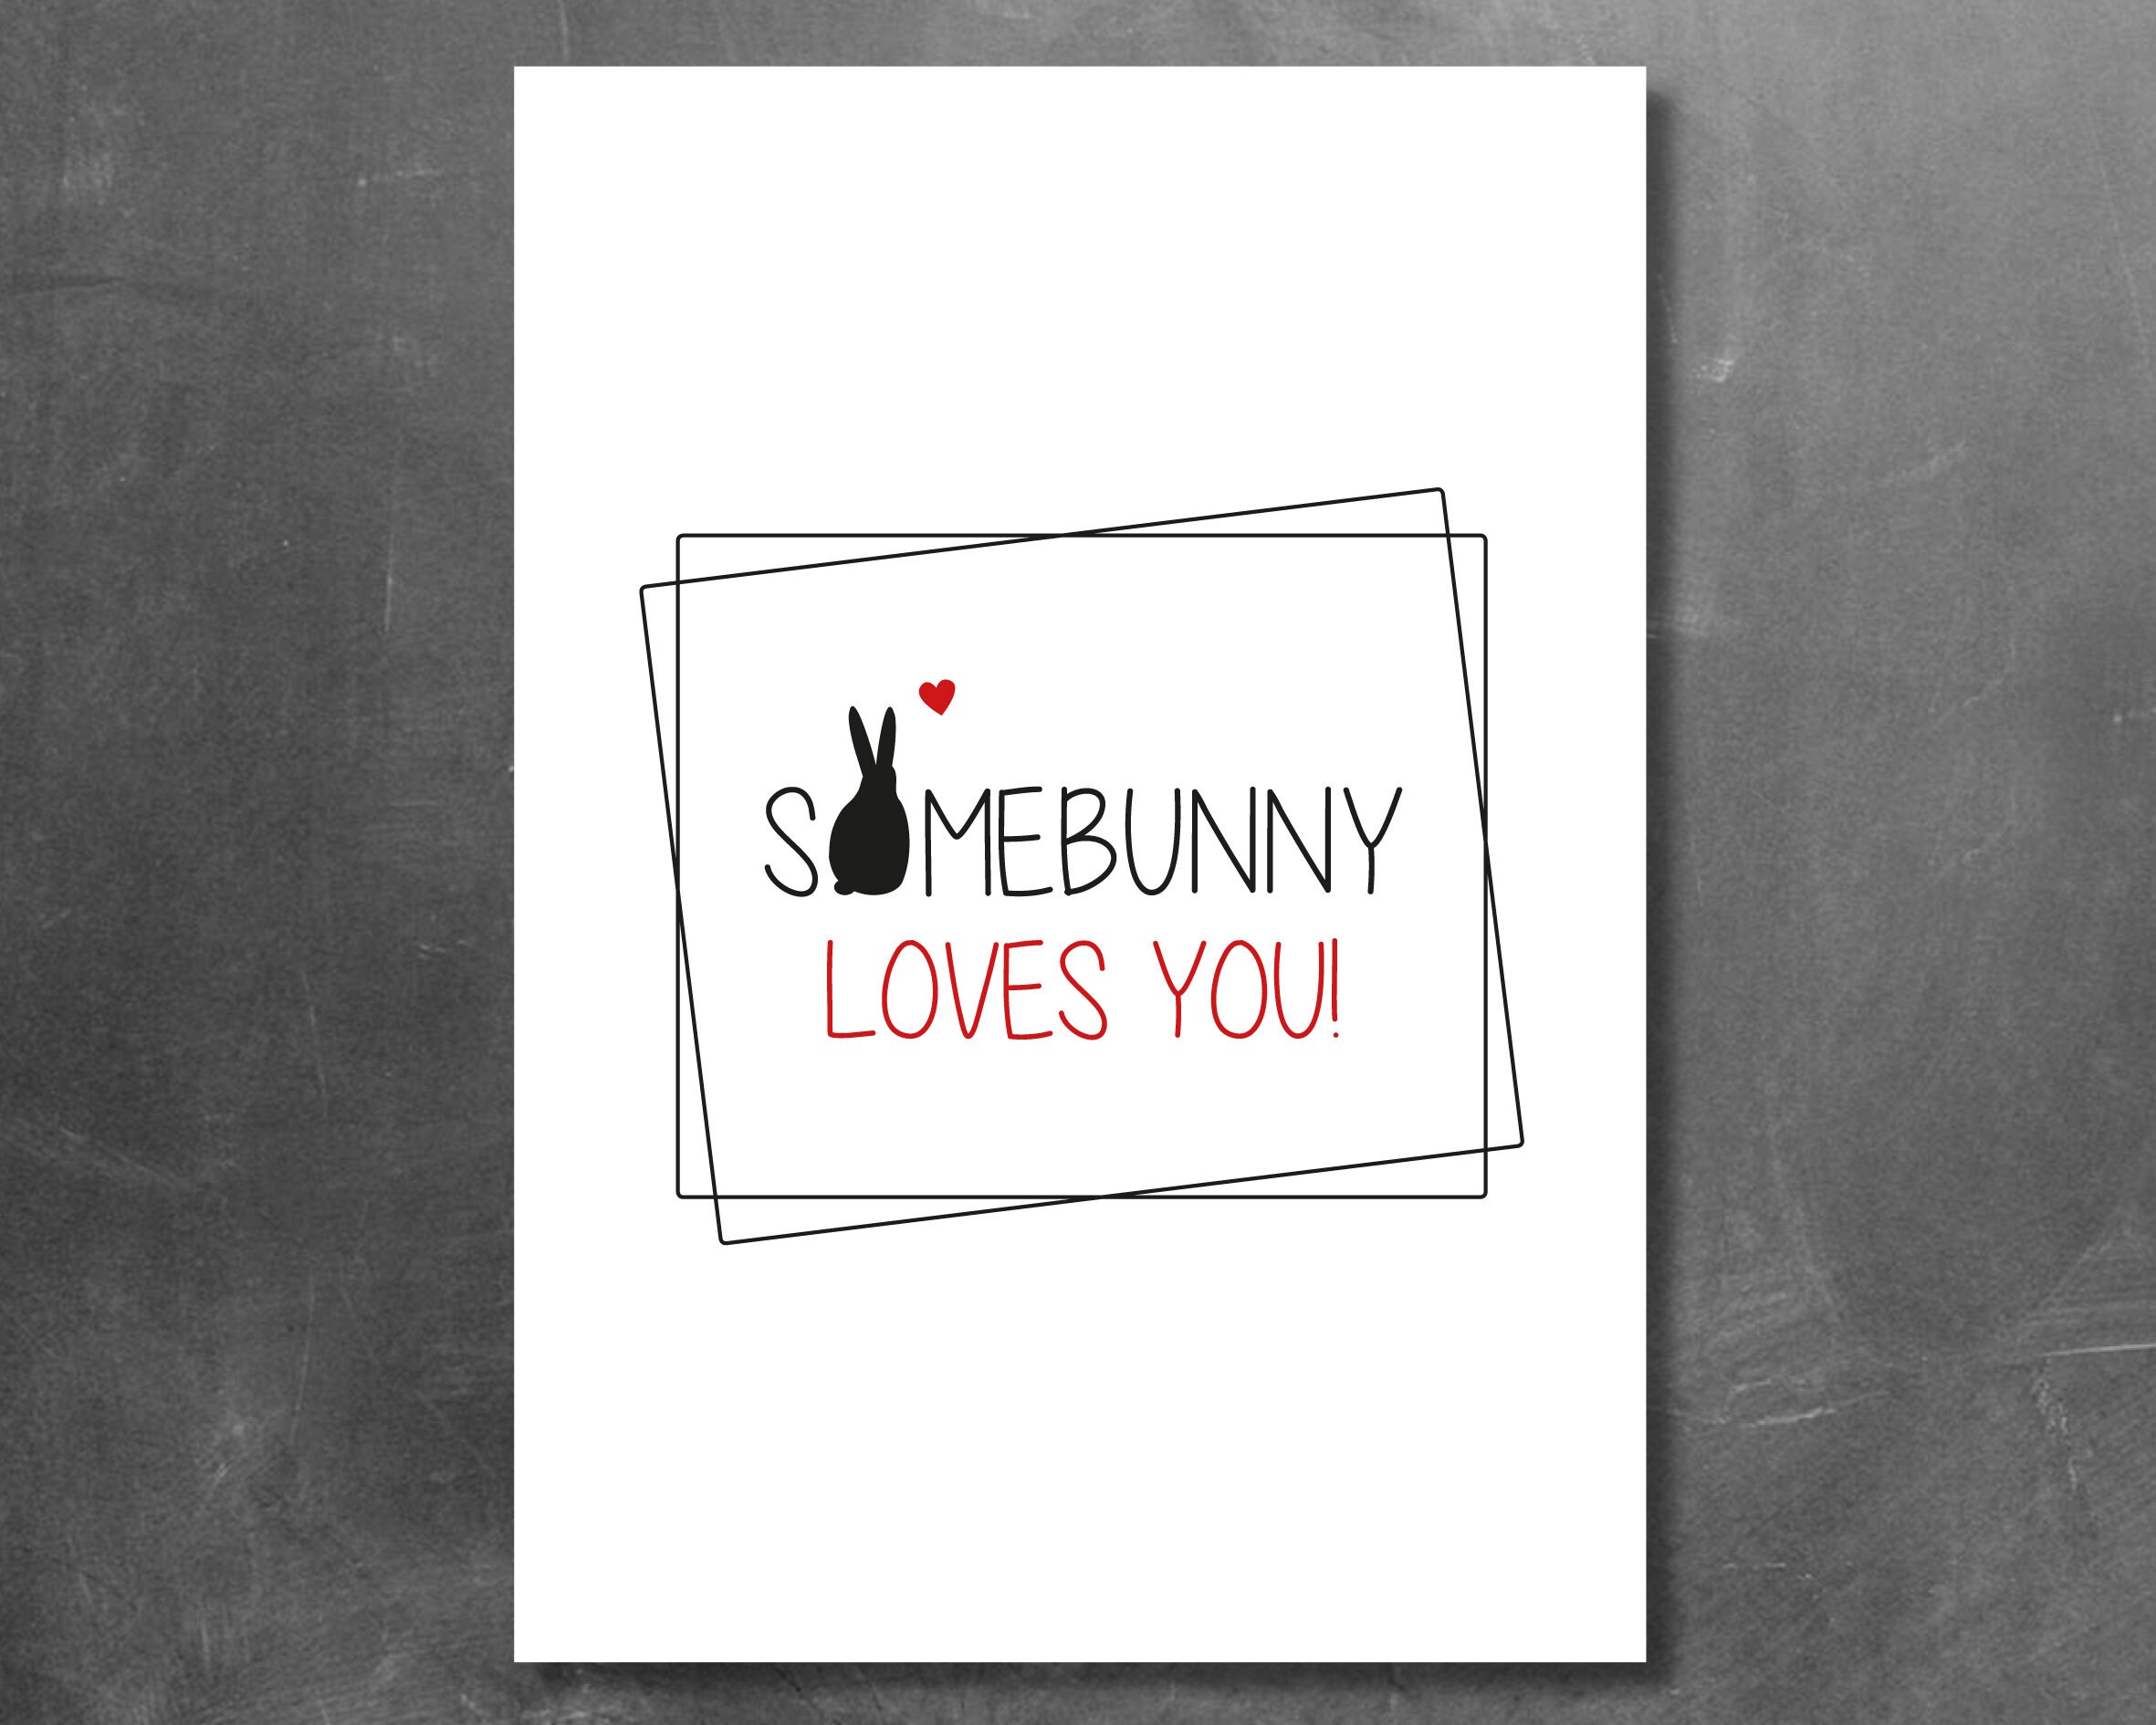 Stamping Bella the Wobbles Somebunny Loves You Brand New cling Stamp 